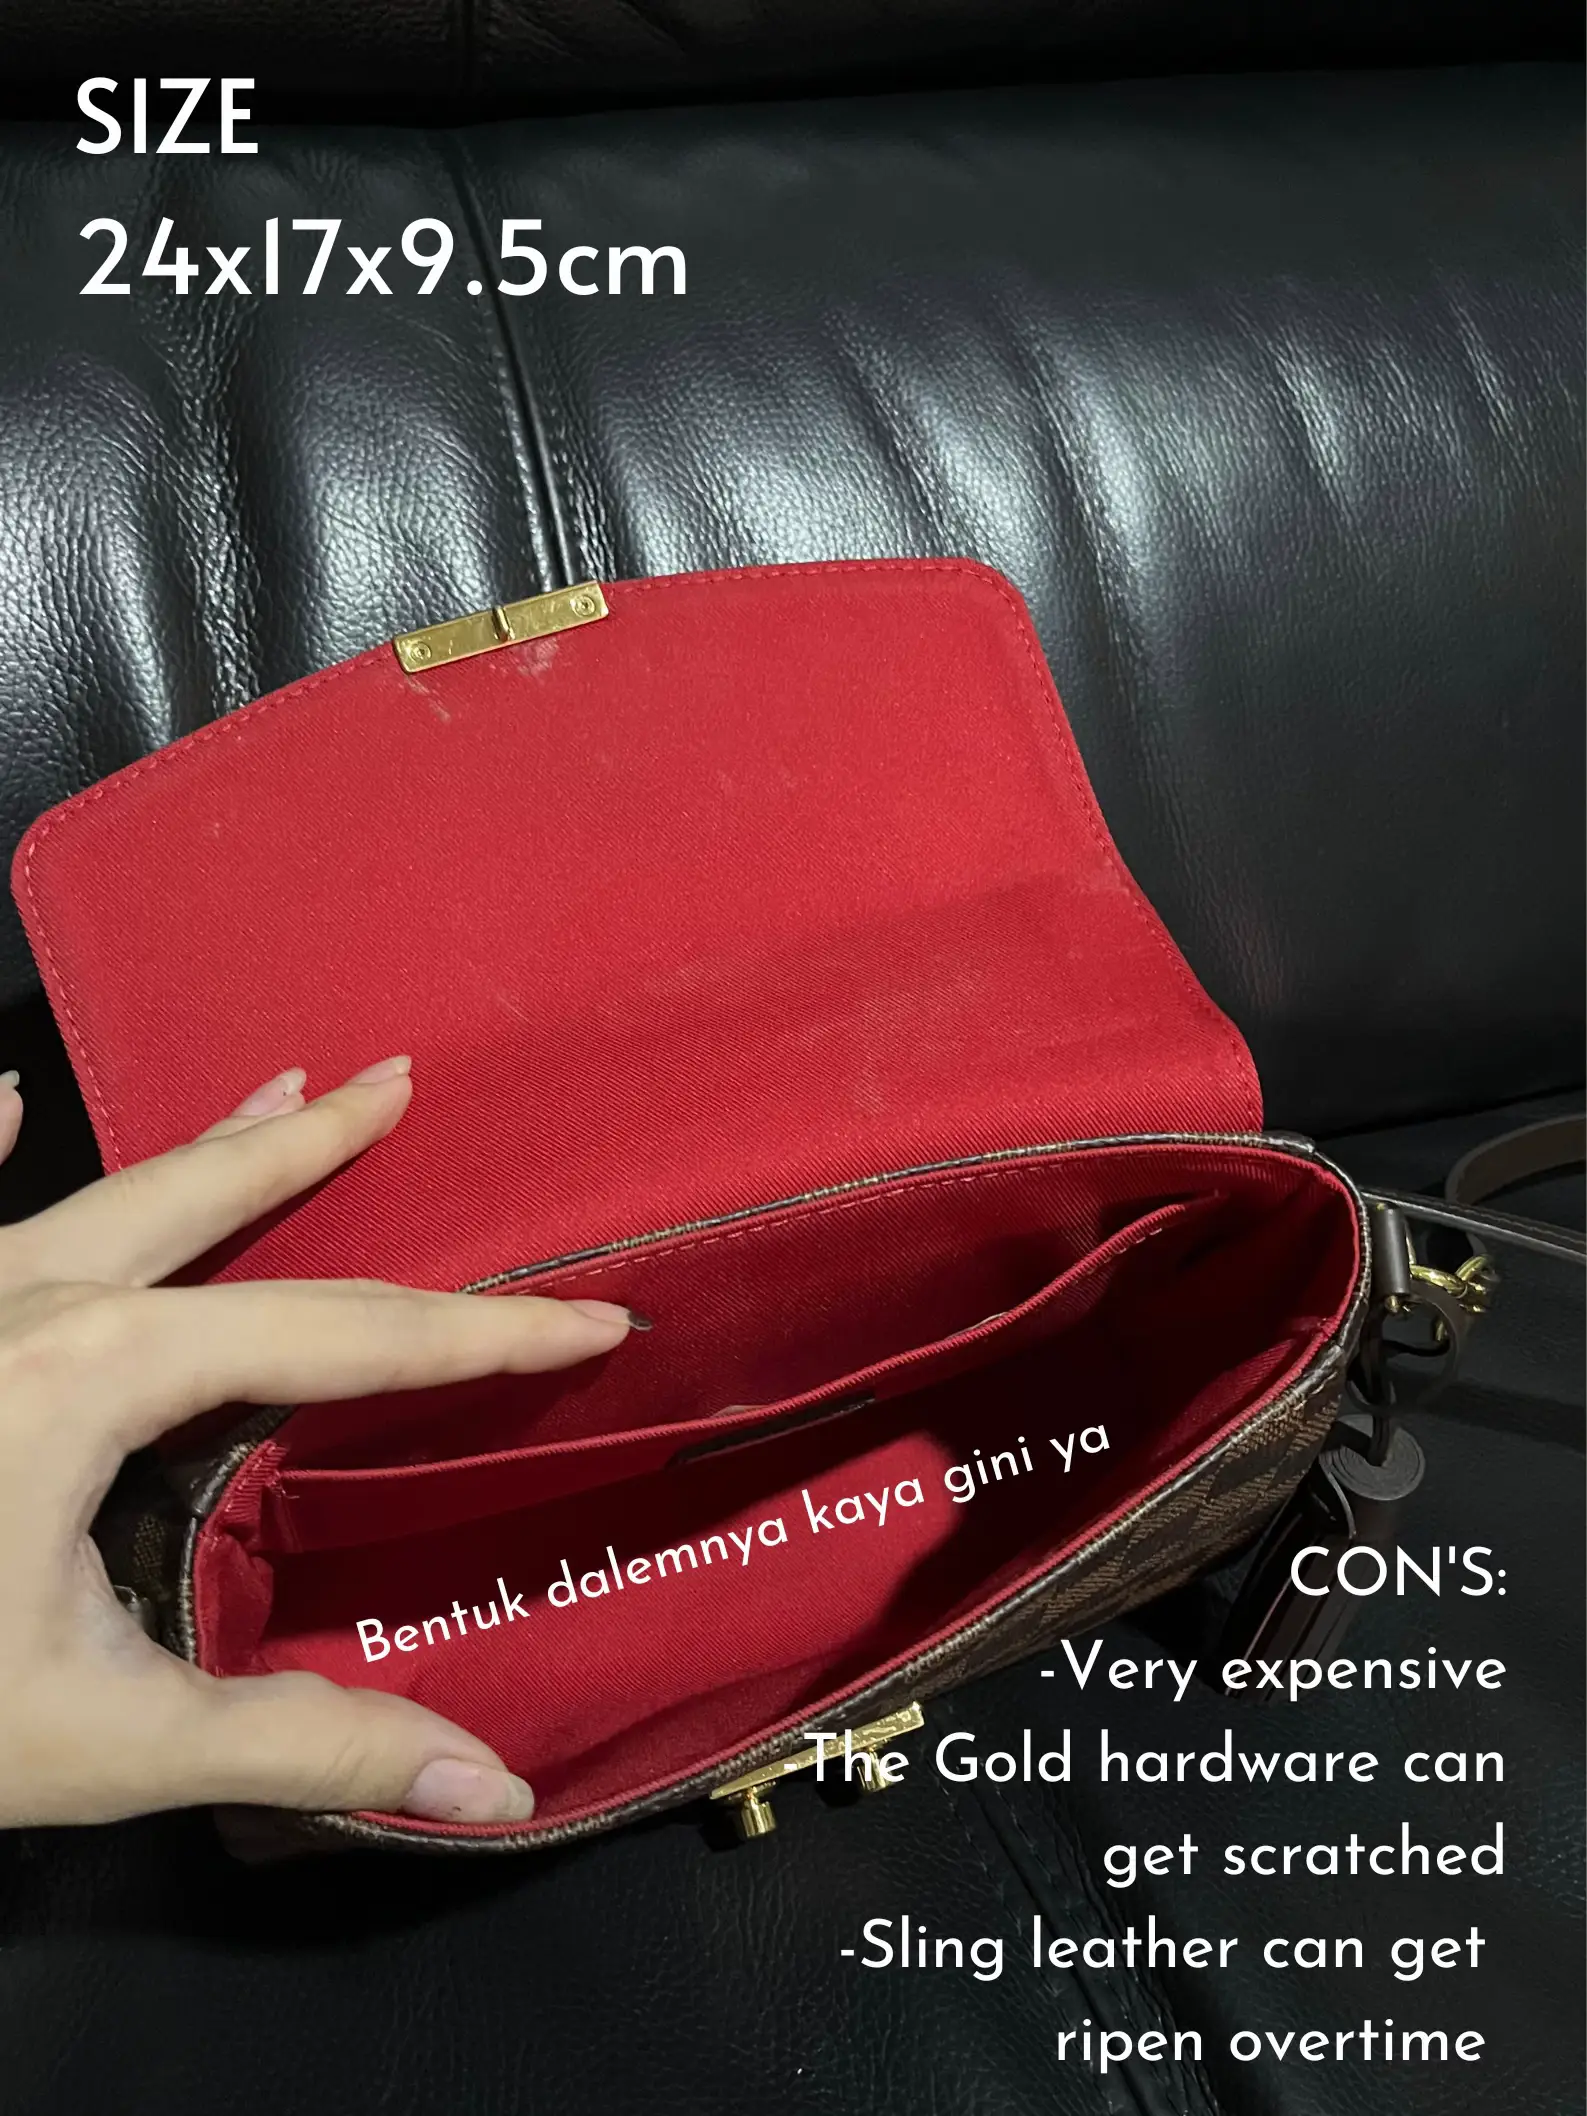 Louis Vuitton Makeup Bag from Dhgate. Check oht that link in the Bio #